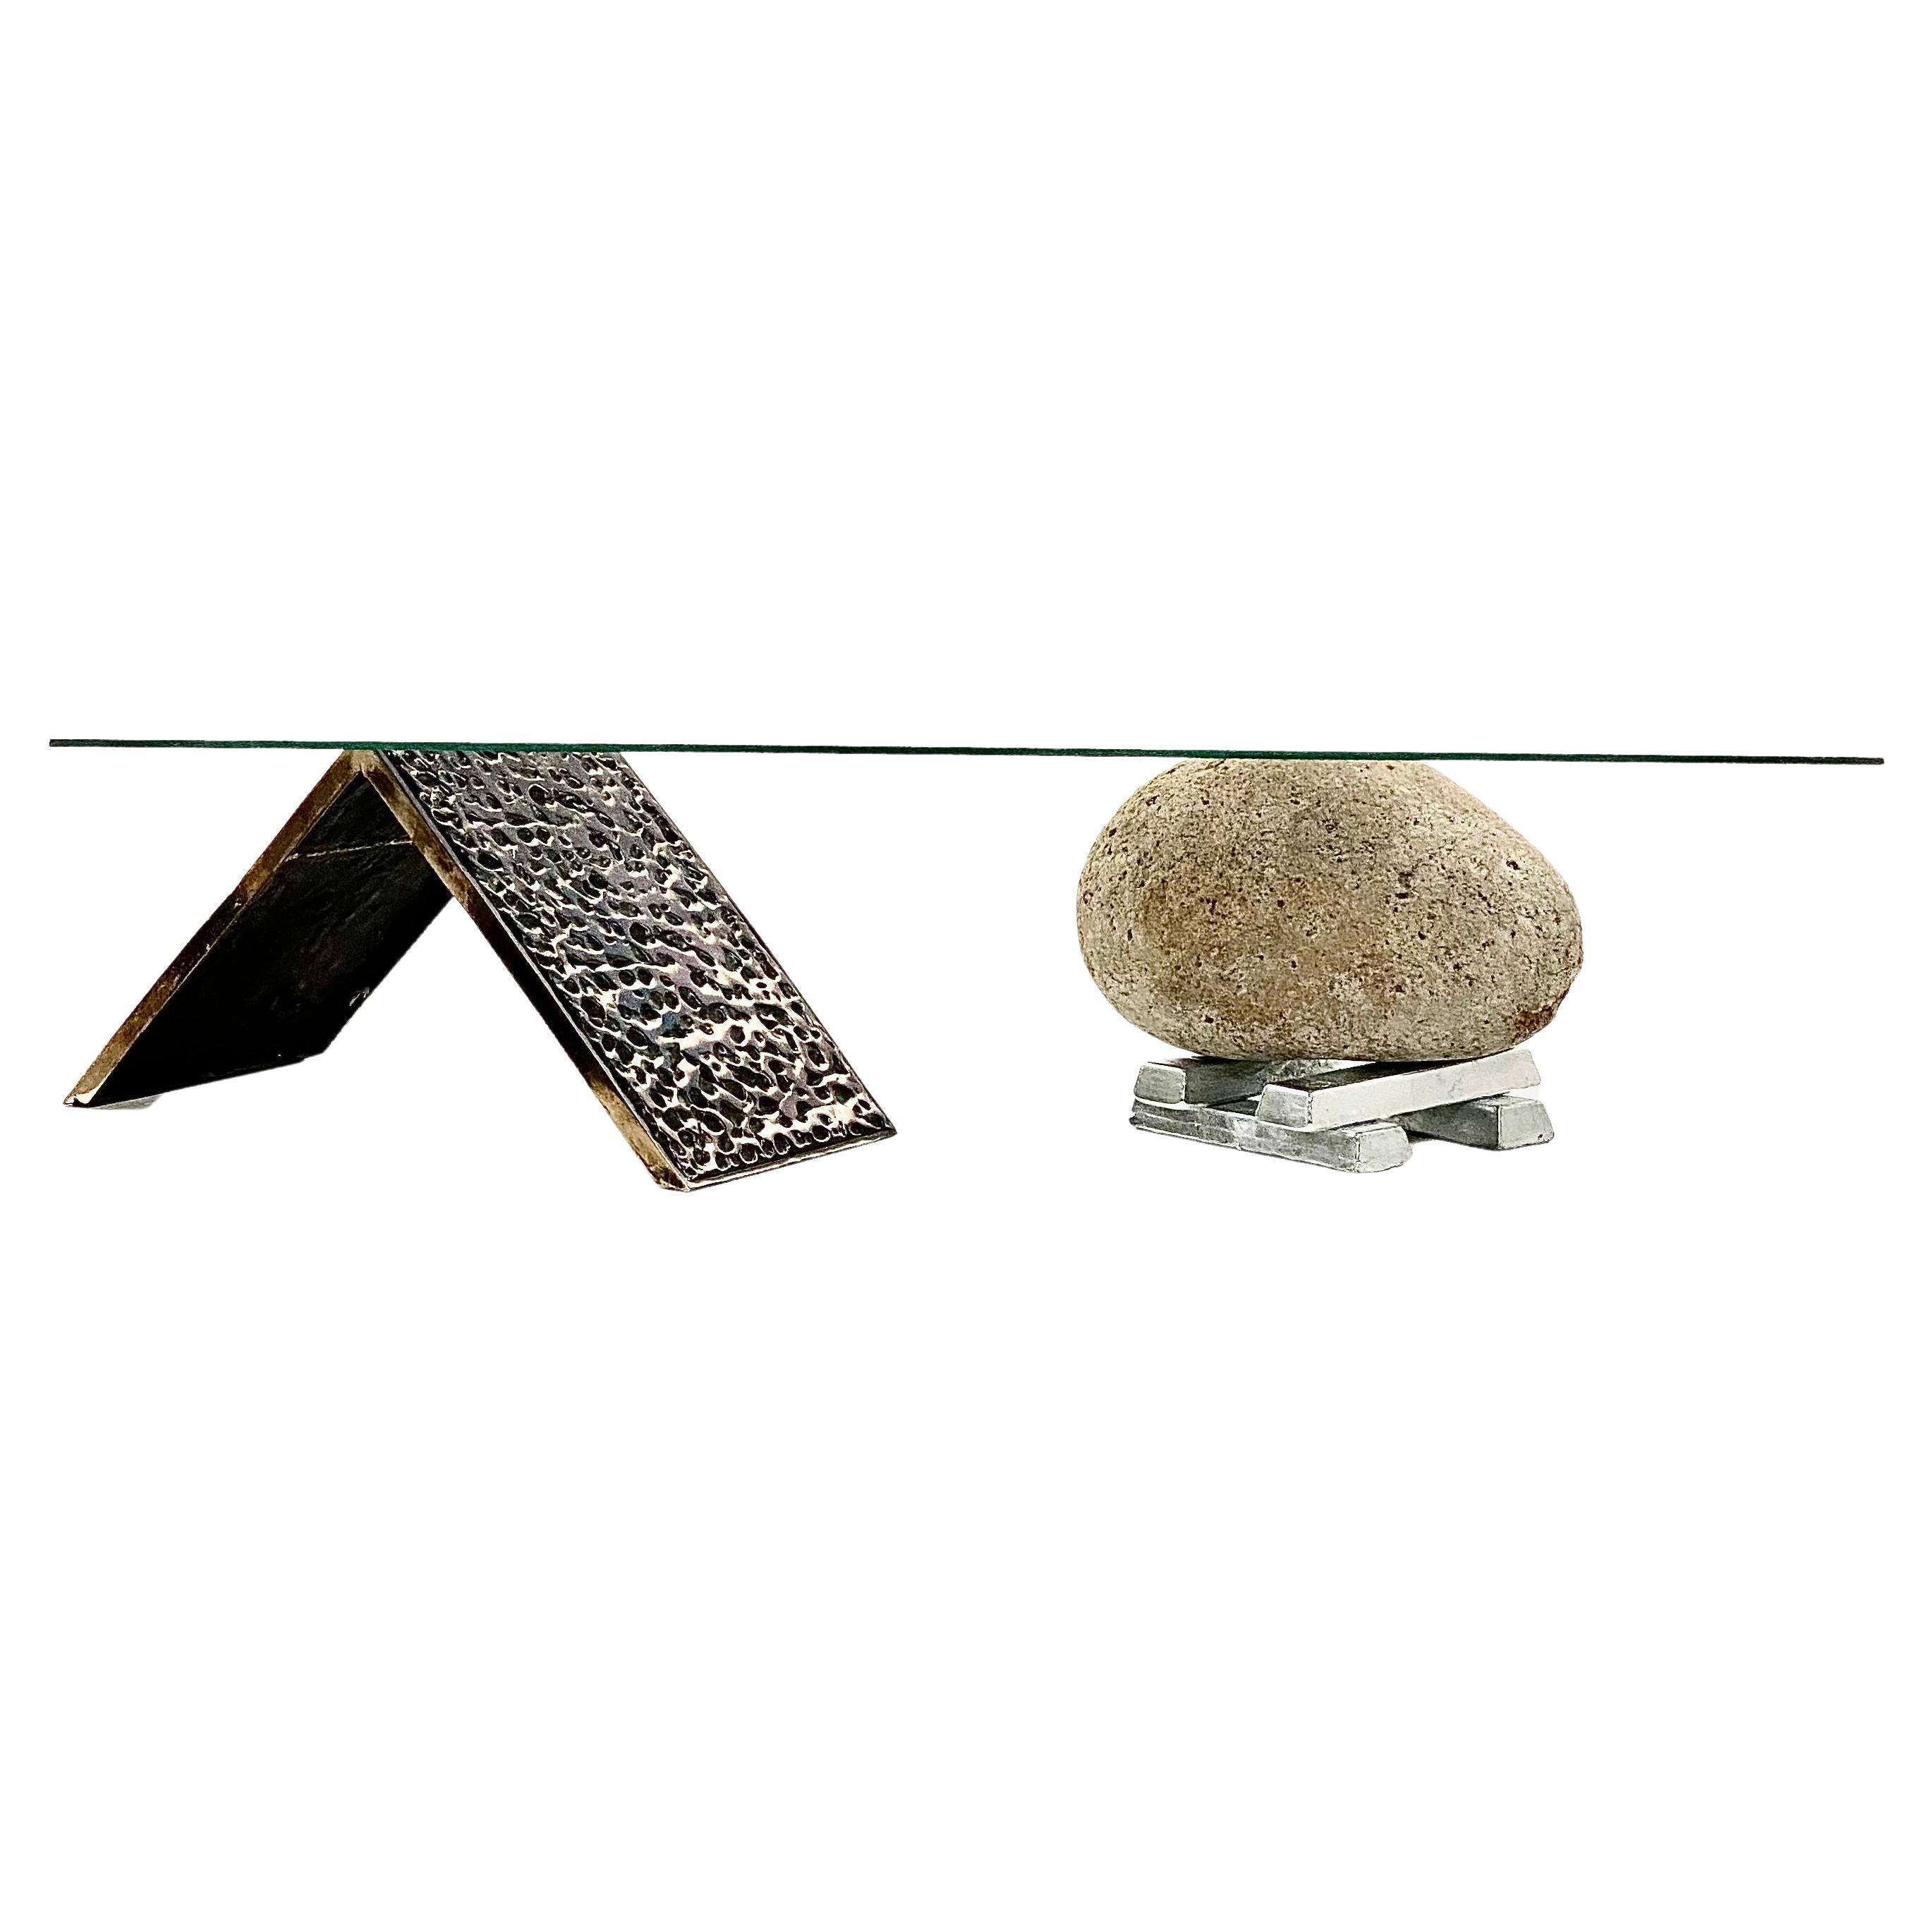 Sculptural Coffee Table in Bronze, Pewter and Stone 21st Century by Mattia Biagi